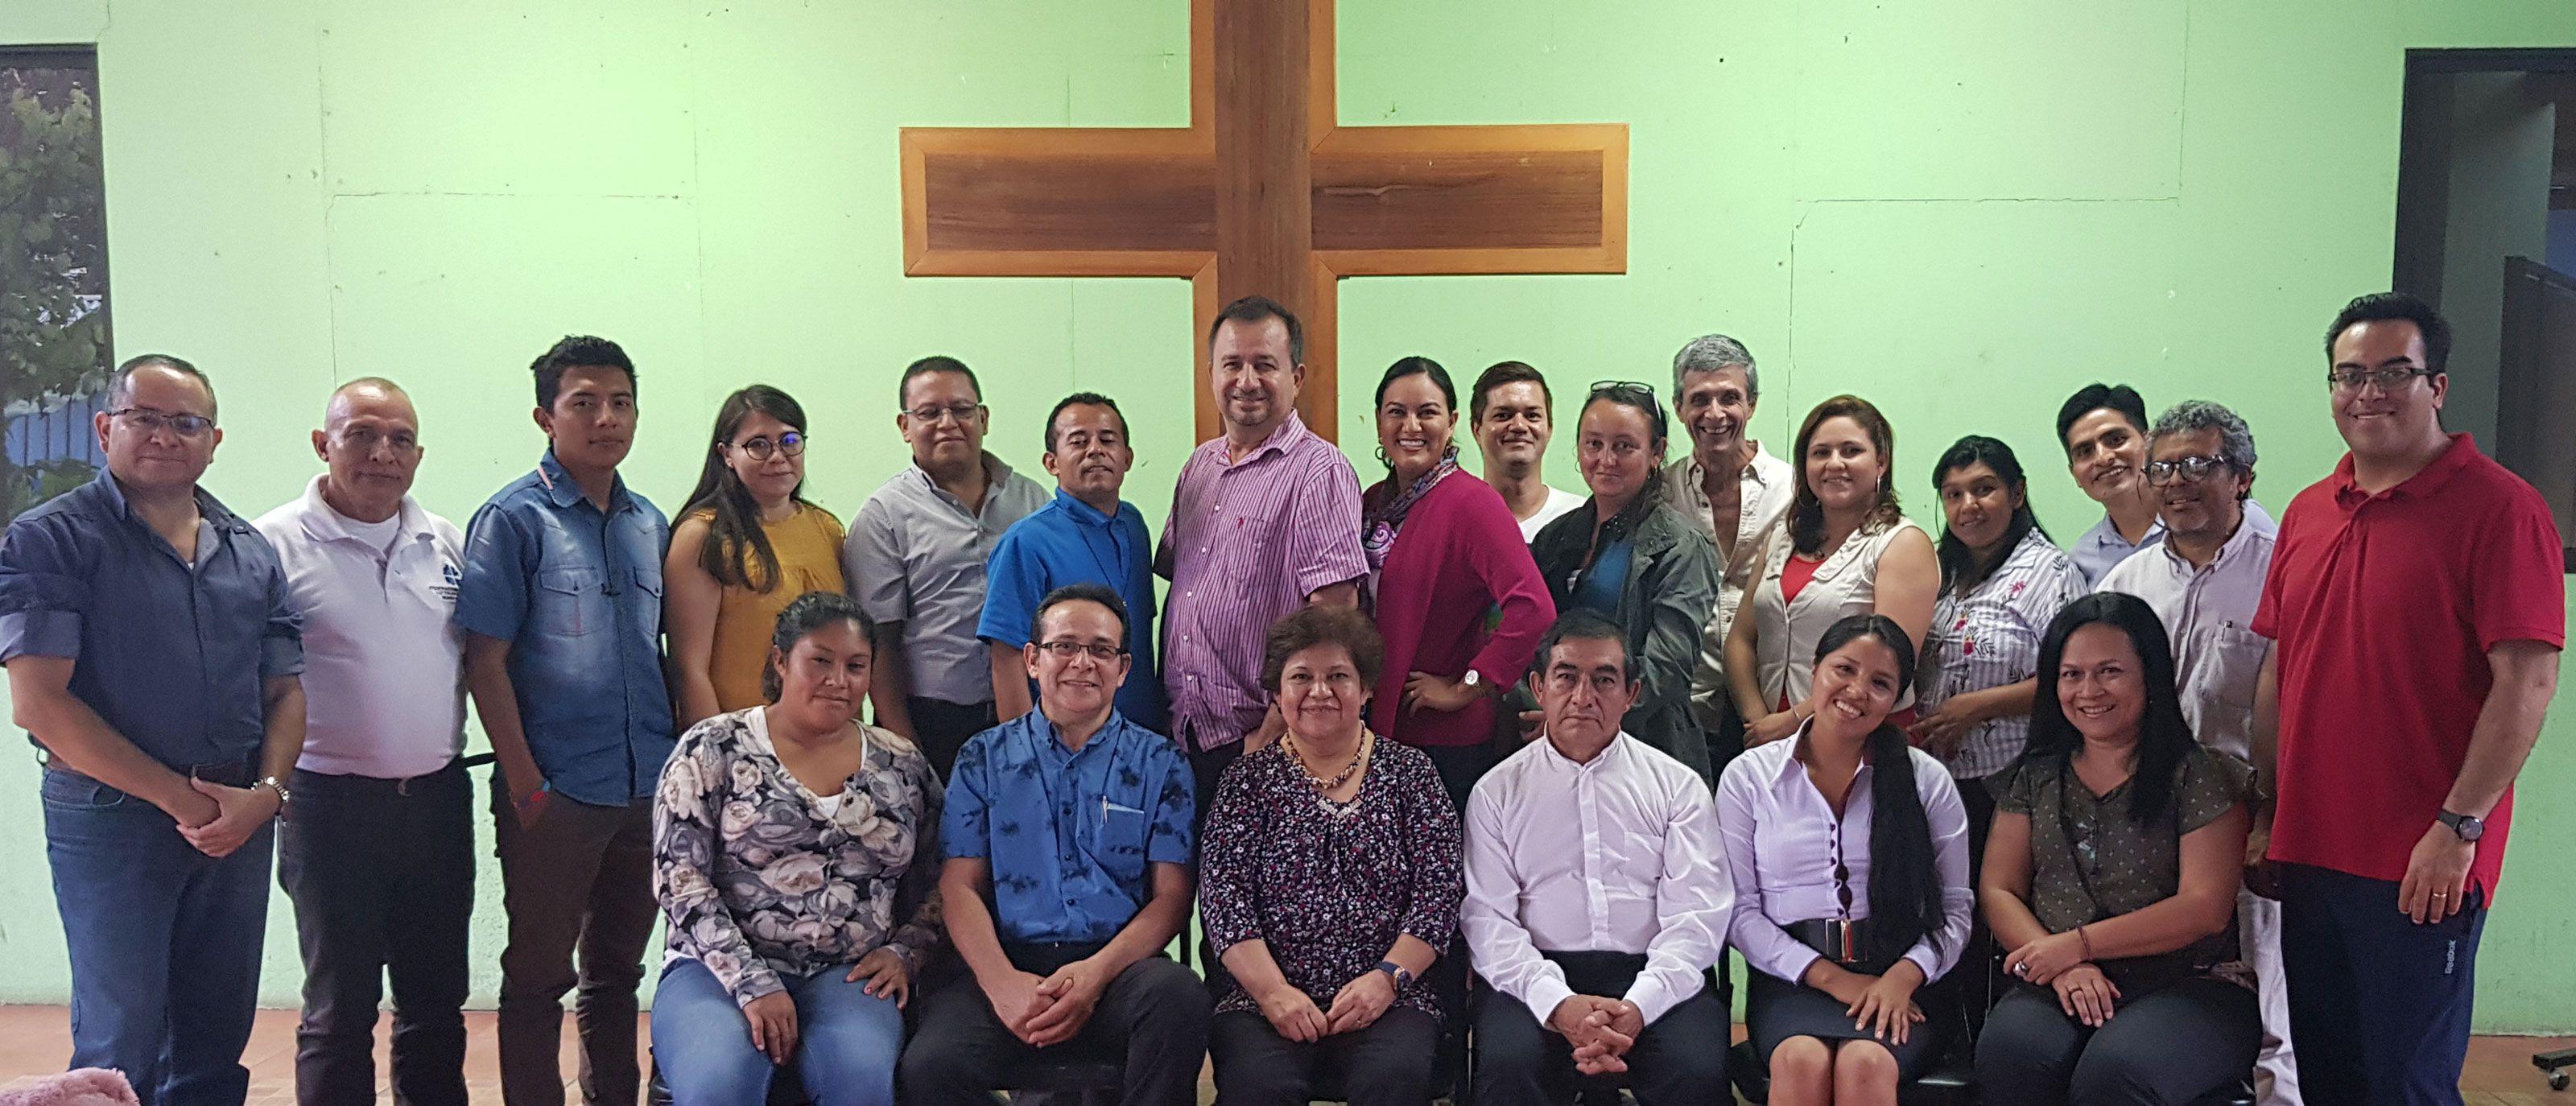 Participants at the LWF advocacy training workshop in San JosÃ©, Costa Rica, 14-16 July.  Photo: LWF/F. Wilches